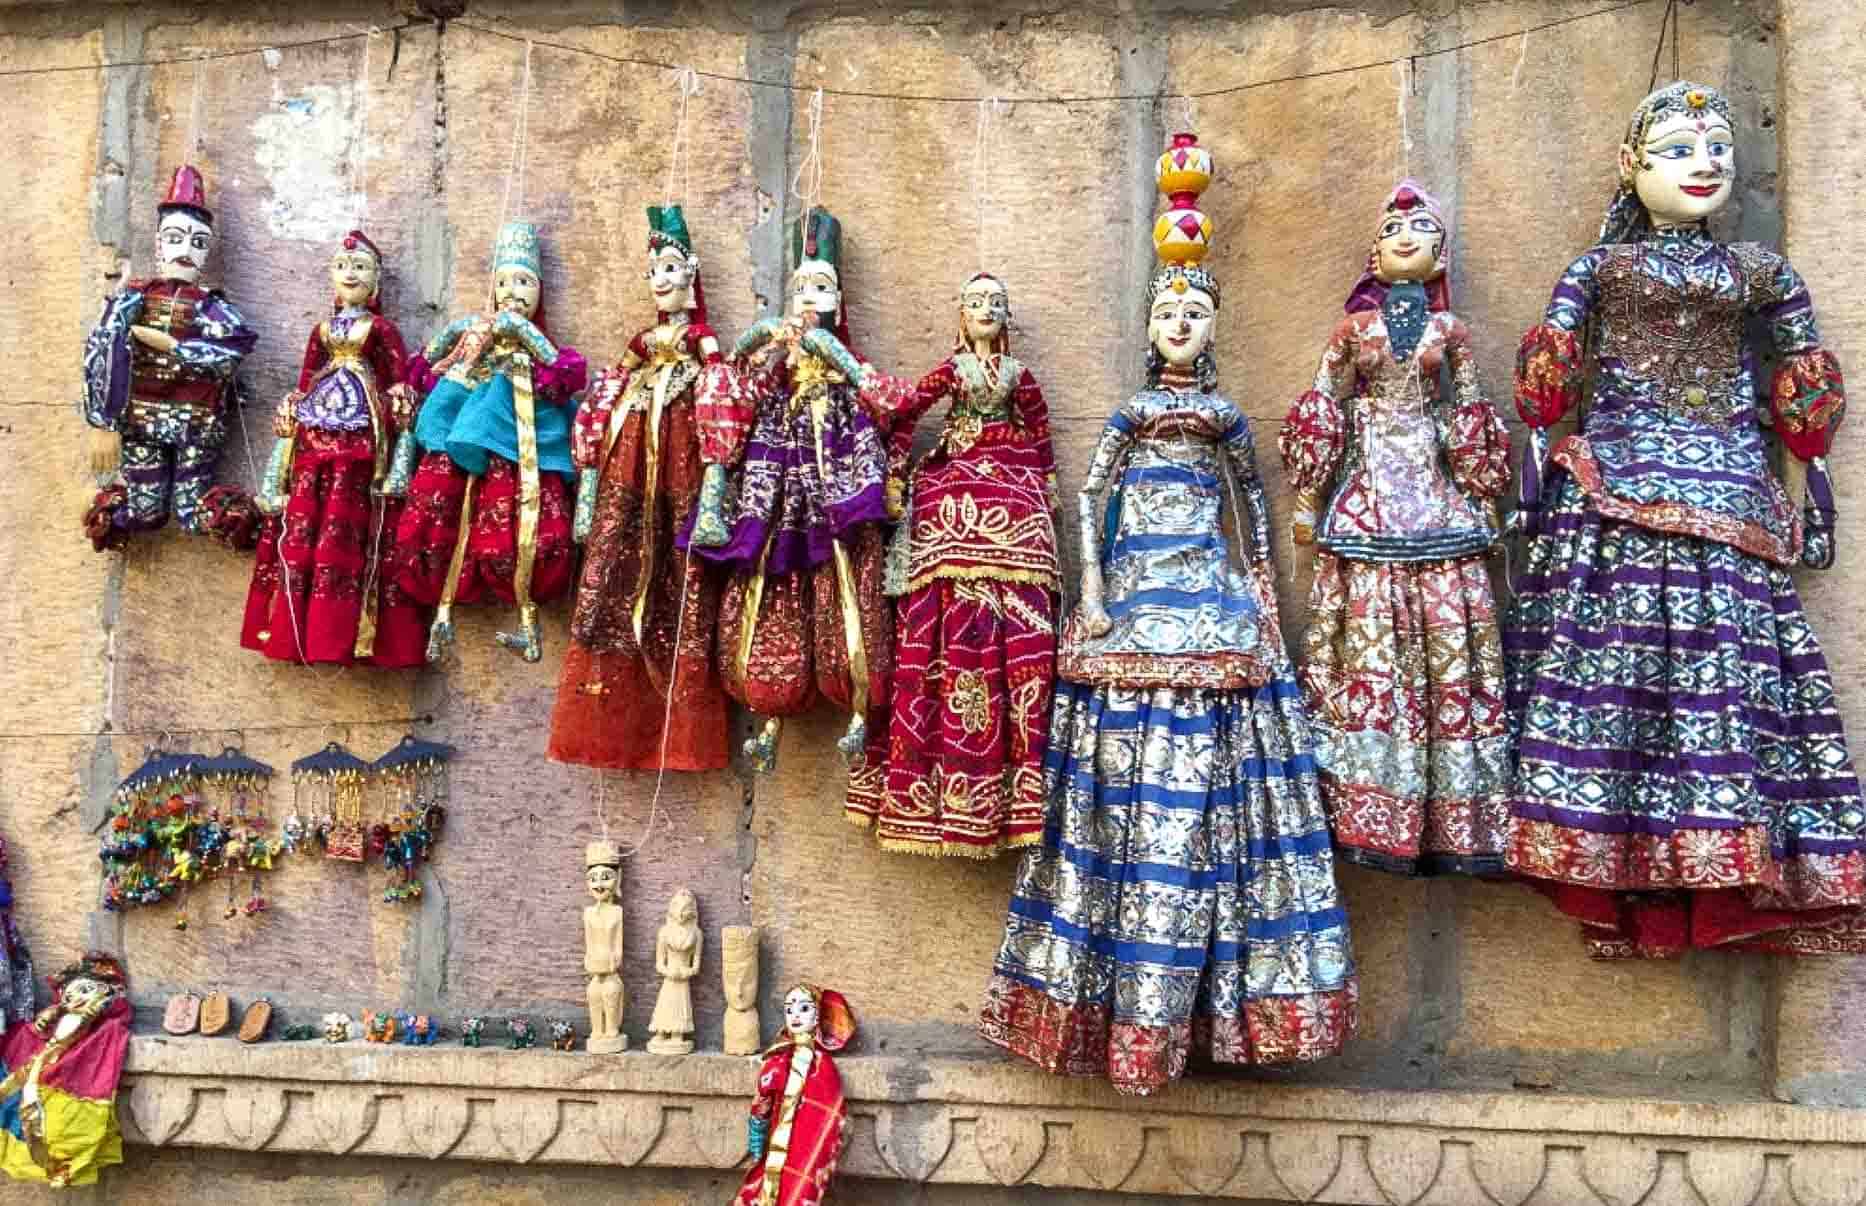 puppets for sale at the market in Jaisalmer, Rajasthan